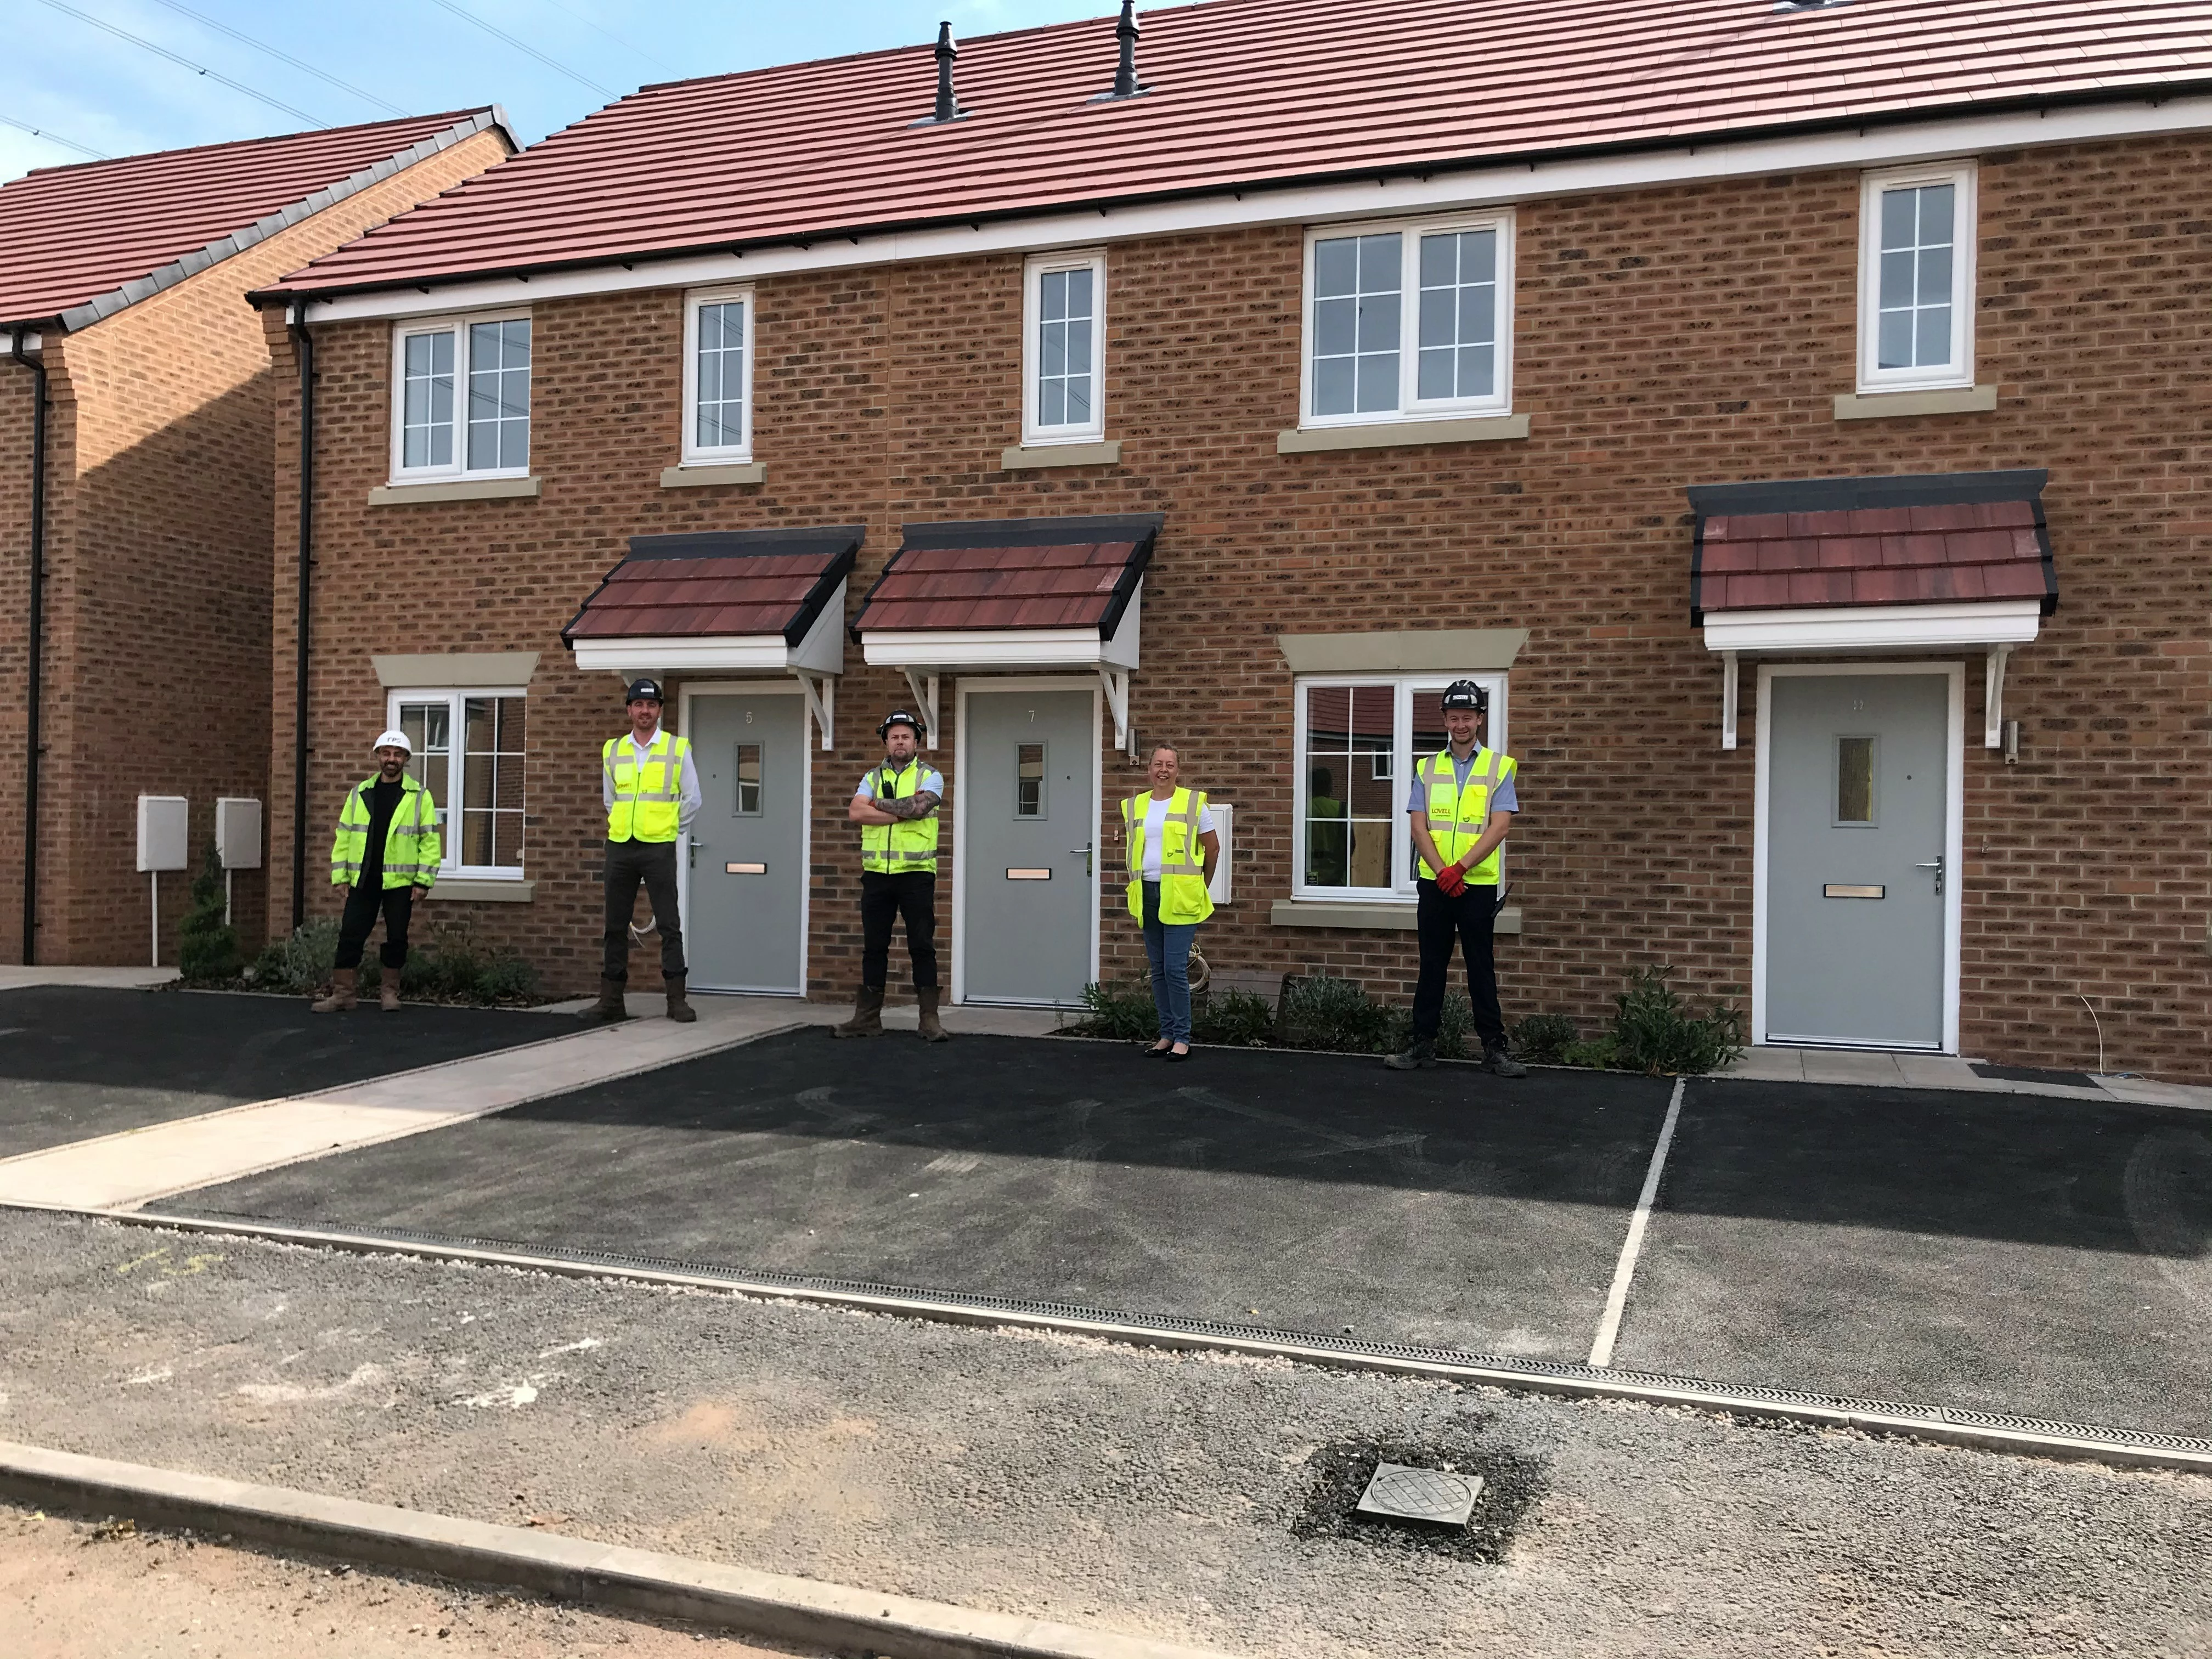 Newly-built homes for shared ownership and rent are handed over in the Staffordshire village of Coven